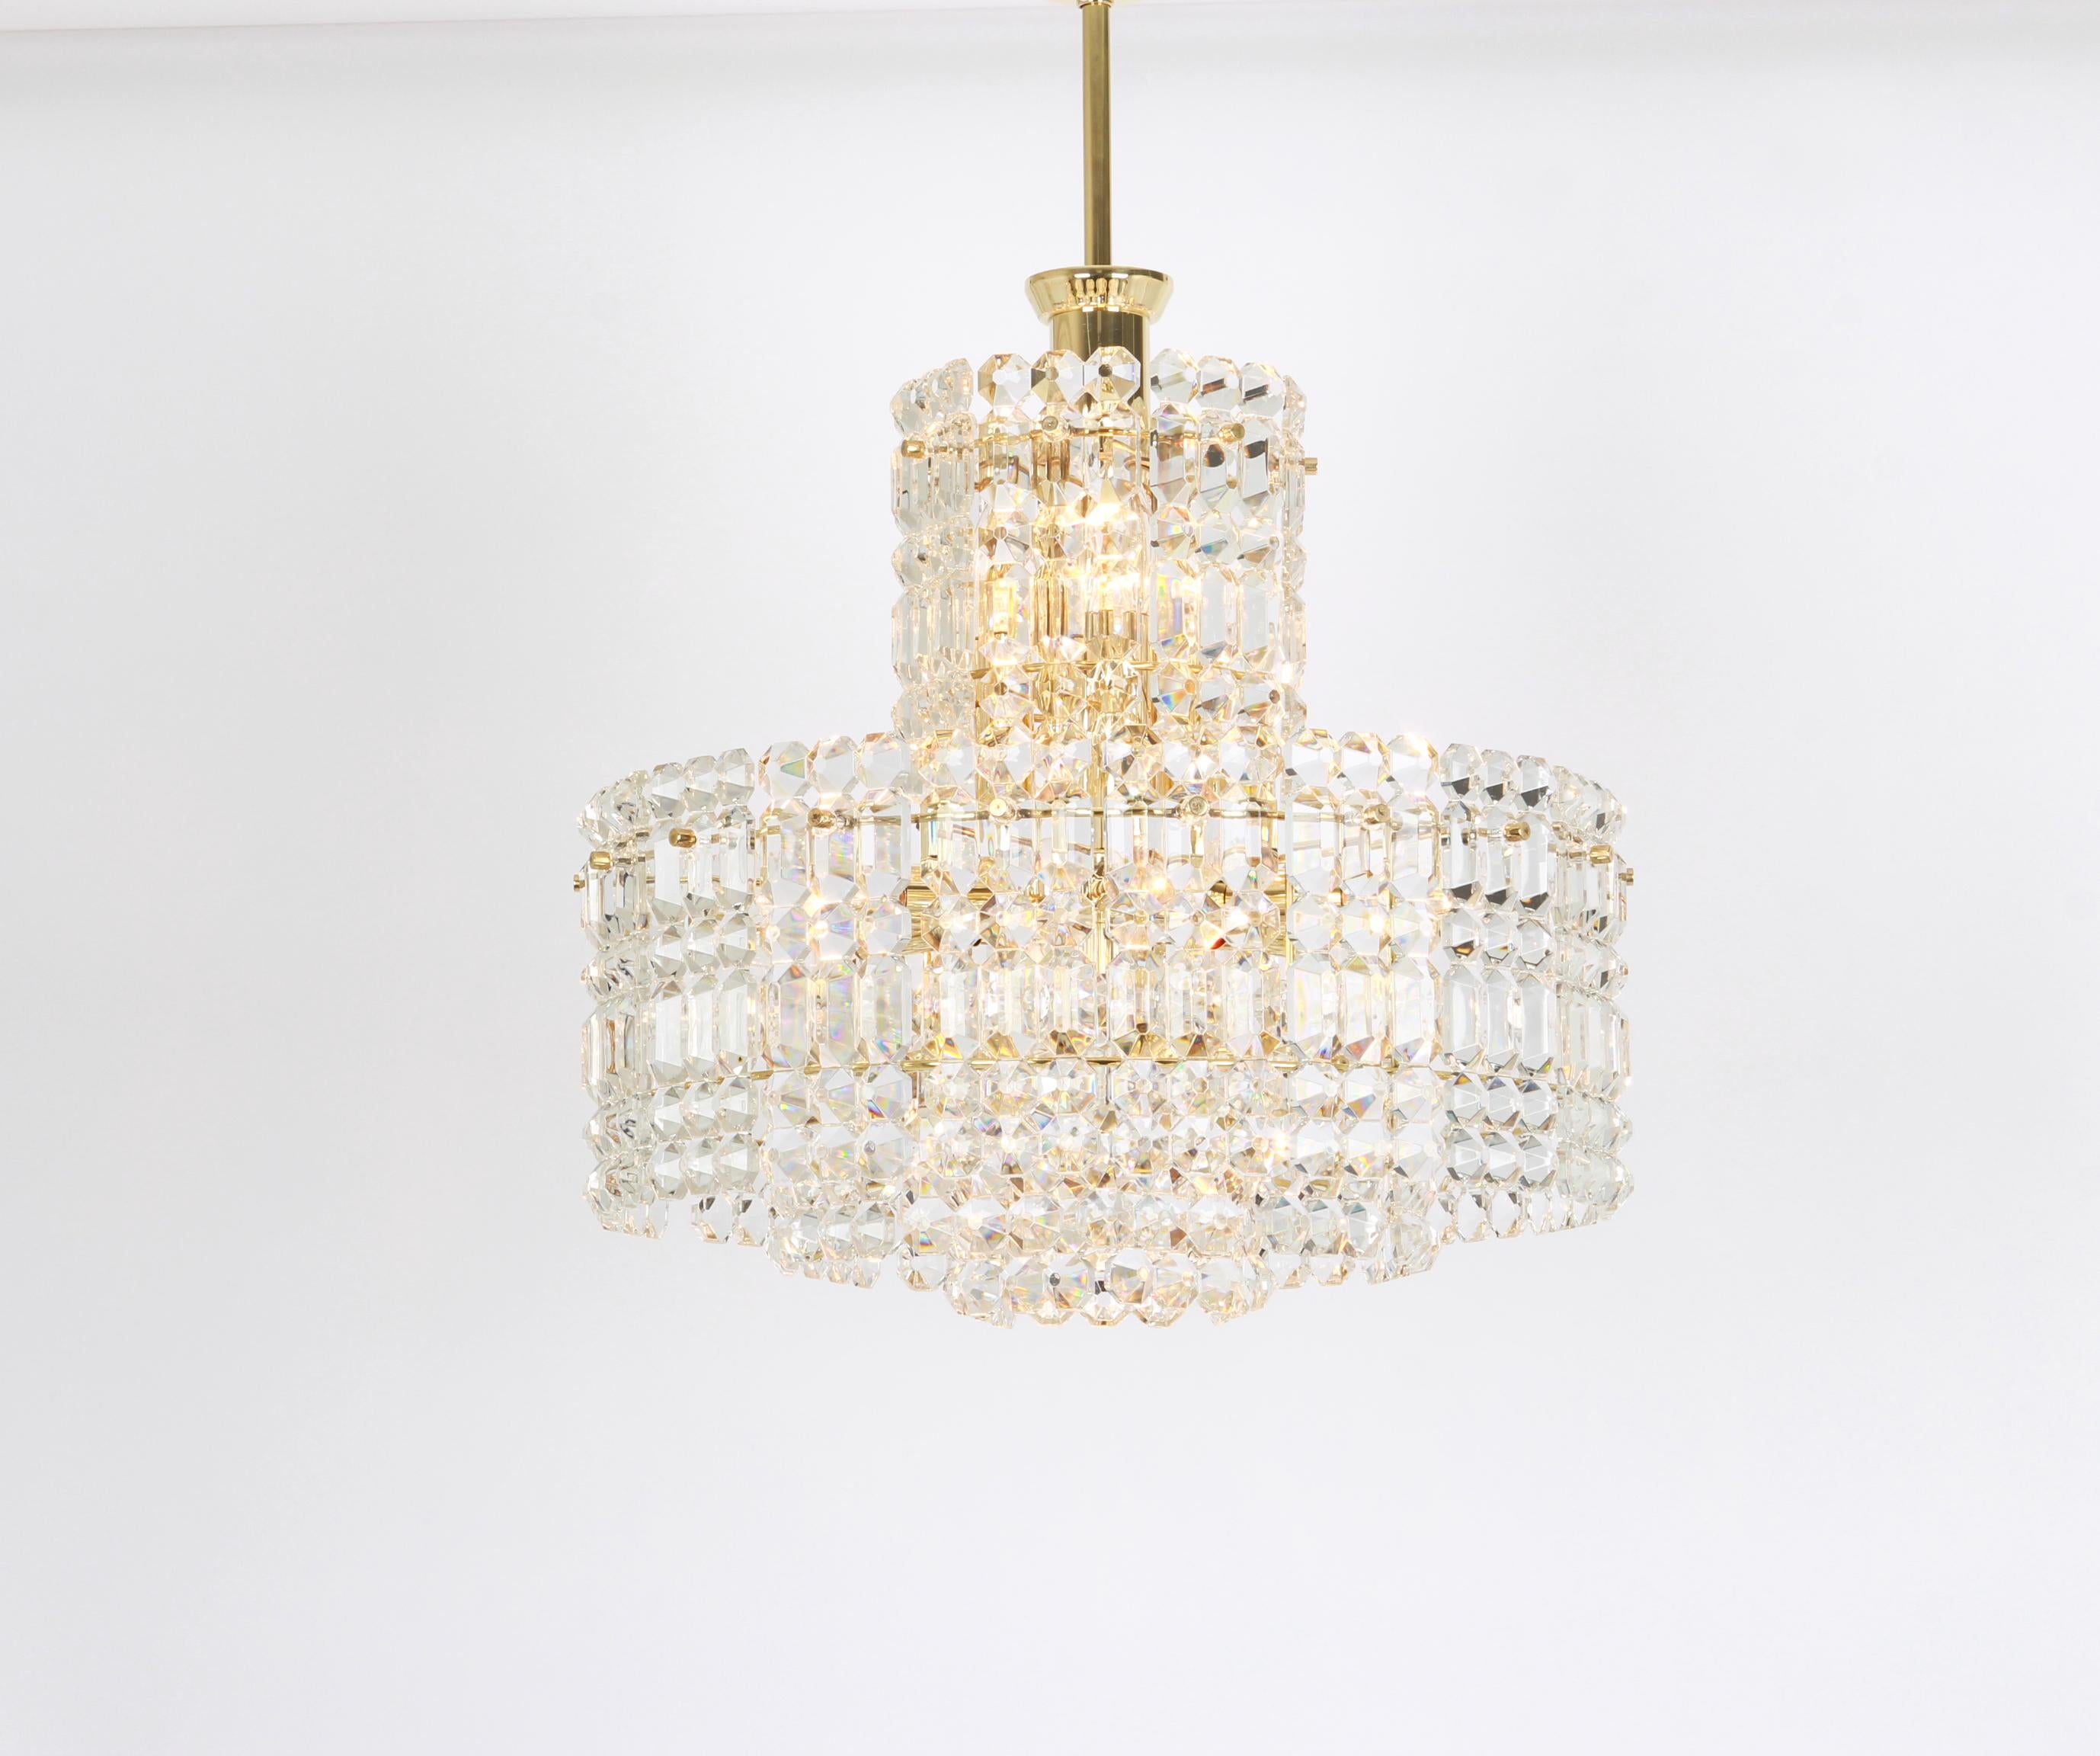 A stunning four-tier chandelier by Kinkeldey, Germany, manufactured in circa 1960-1969. A handmade and high-quality piece. The ceiling fixture and the frame are made of brass and have four rings with lots of faceted crystal glass elements.

High